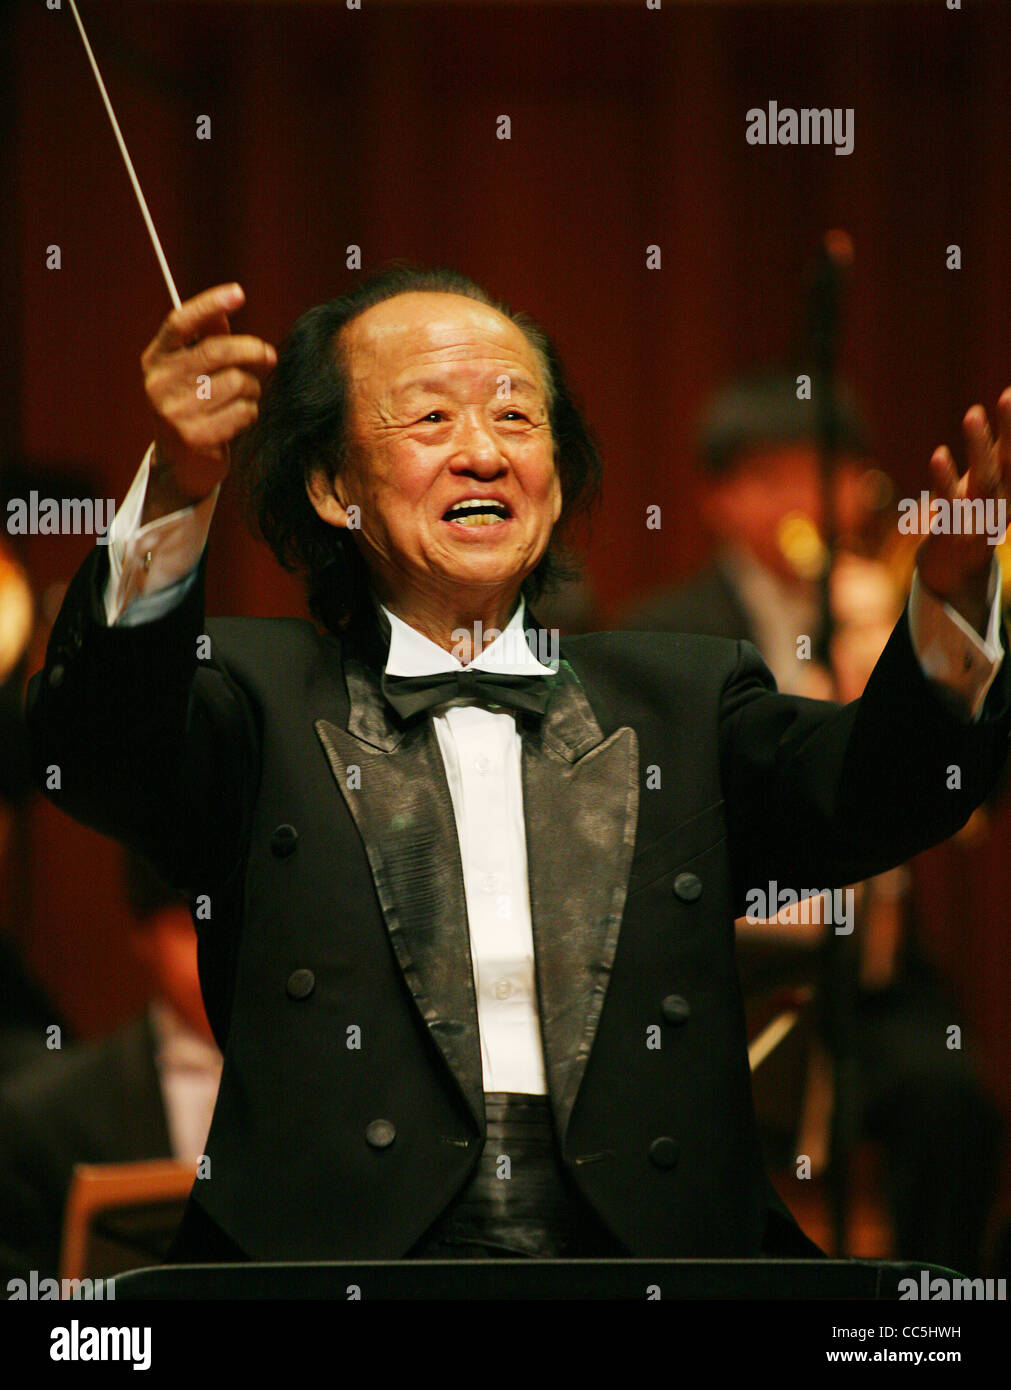 Classical music conductor raising his arms, Beijing, China Stock Photo